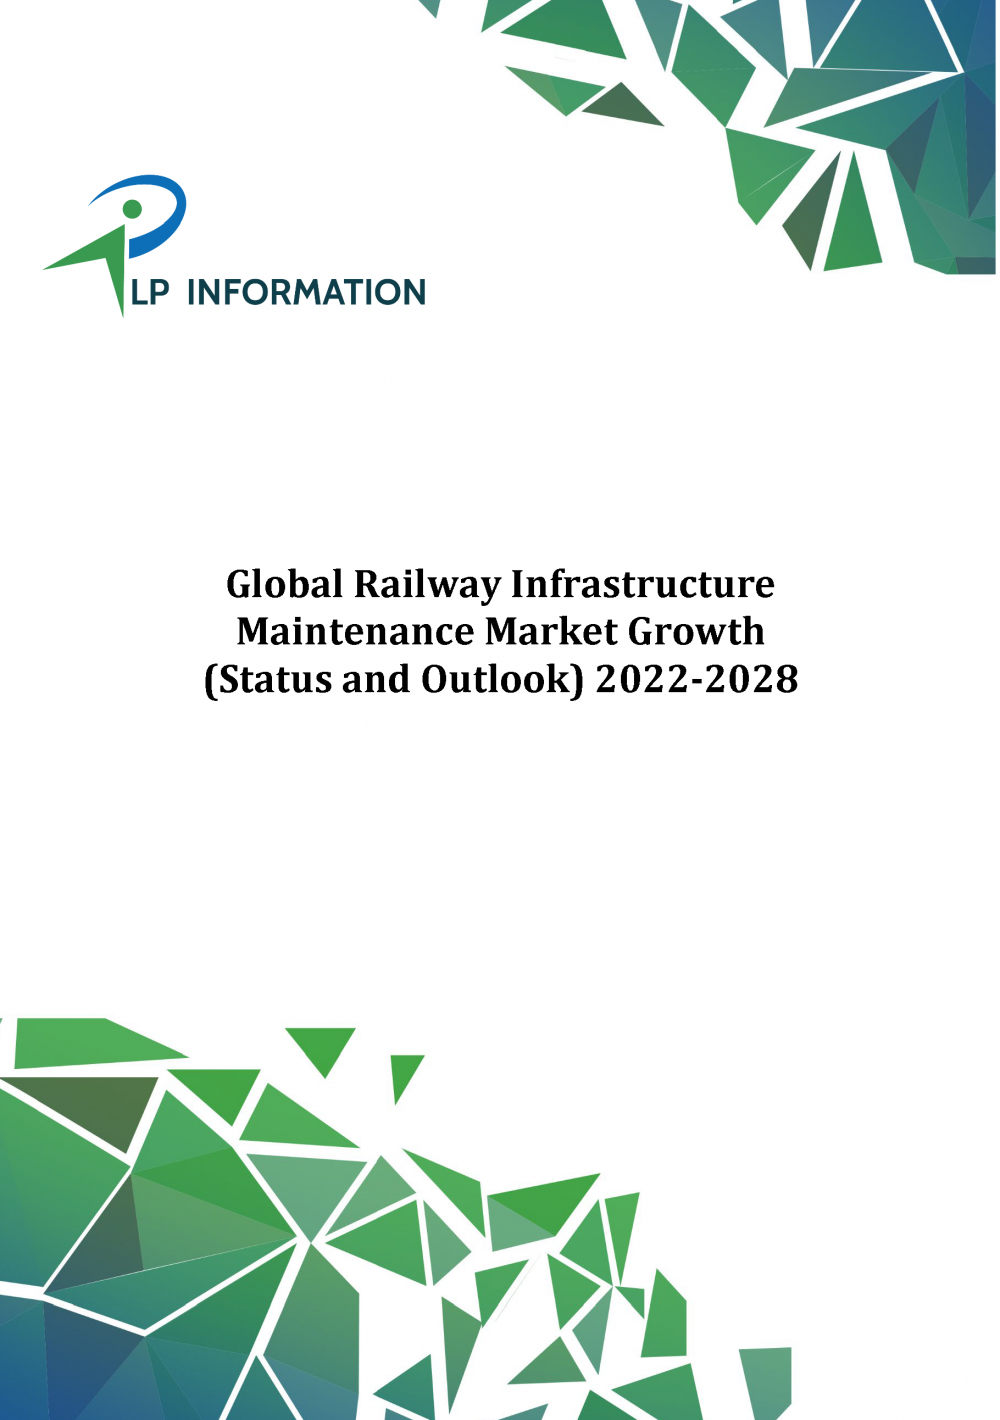 Global Railway Infrastructure Maintenance Market Growth (Status and Outlook) 2022-2028_cover